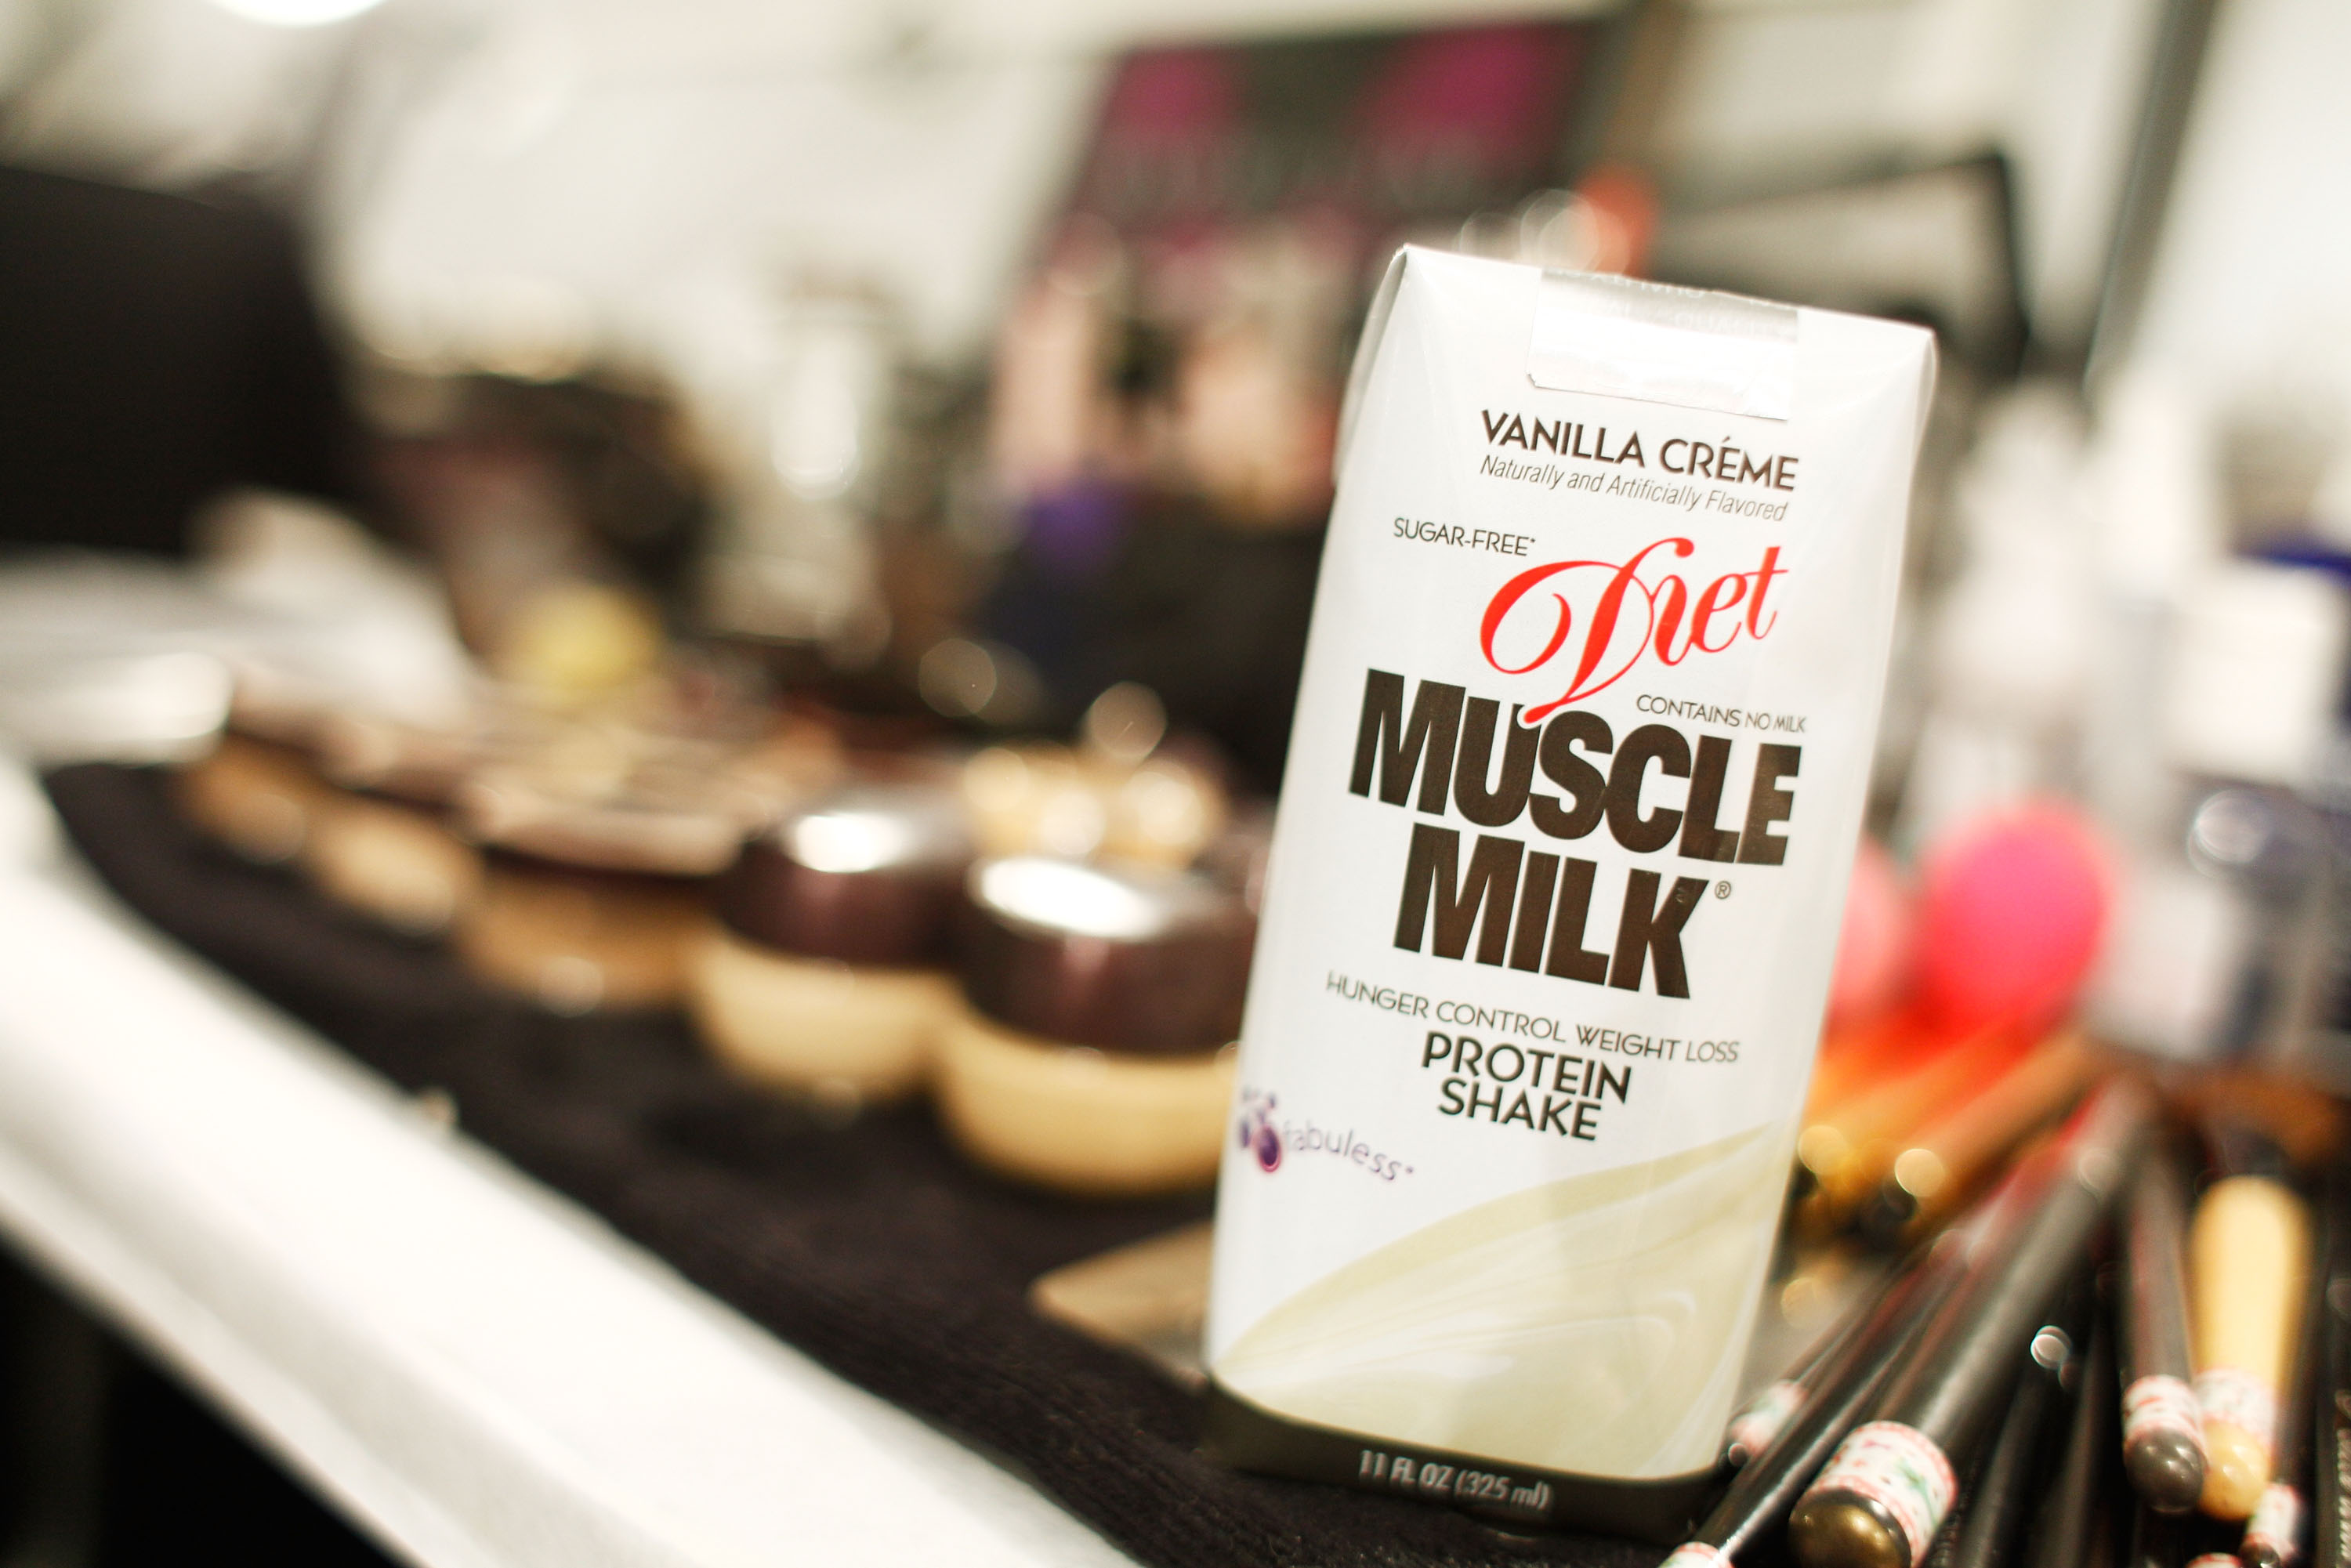 A carton of Diet Muscle Milk at the Diet Muscle Milk Fuels NY Fashion Week at Lincoln Center on September 12, 2010 in New York City. (Brian Ach&mdash;Getty Images)